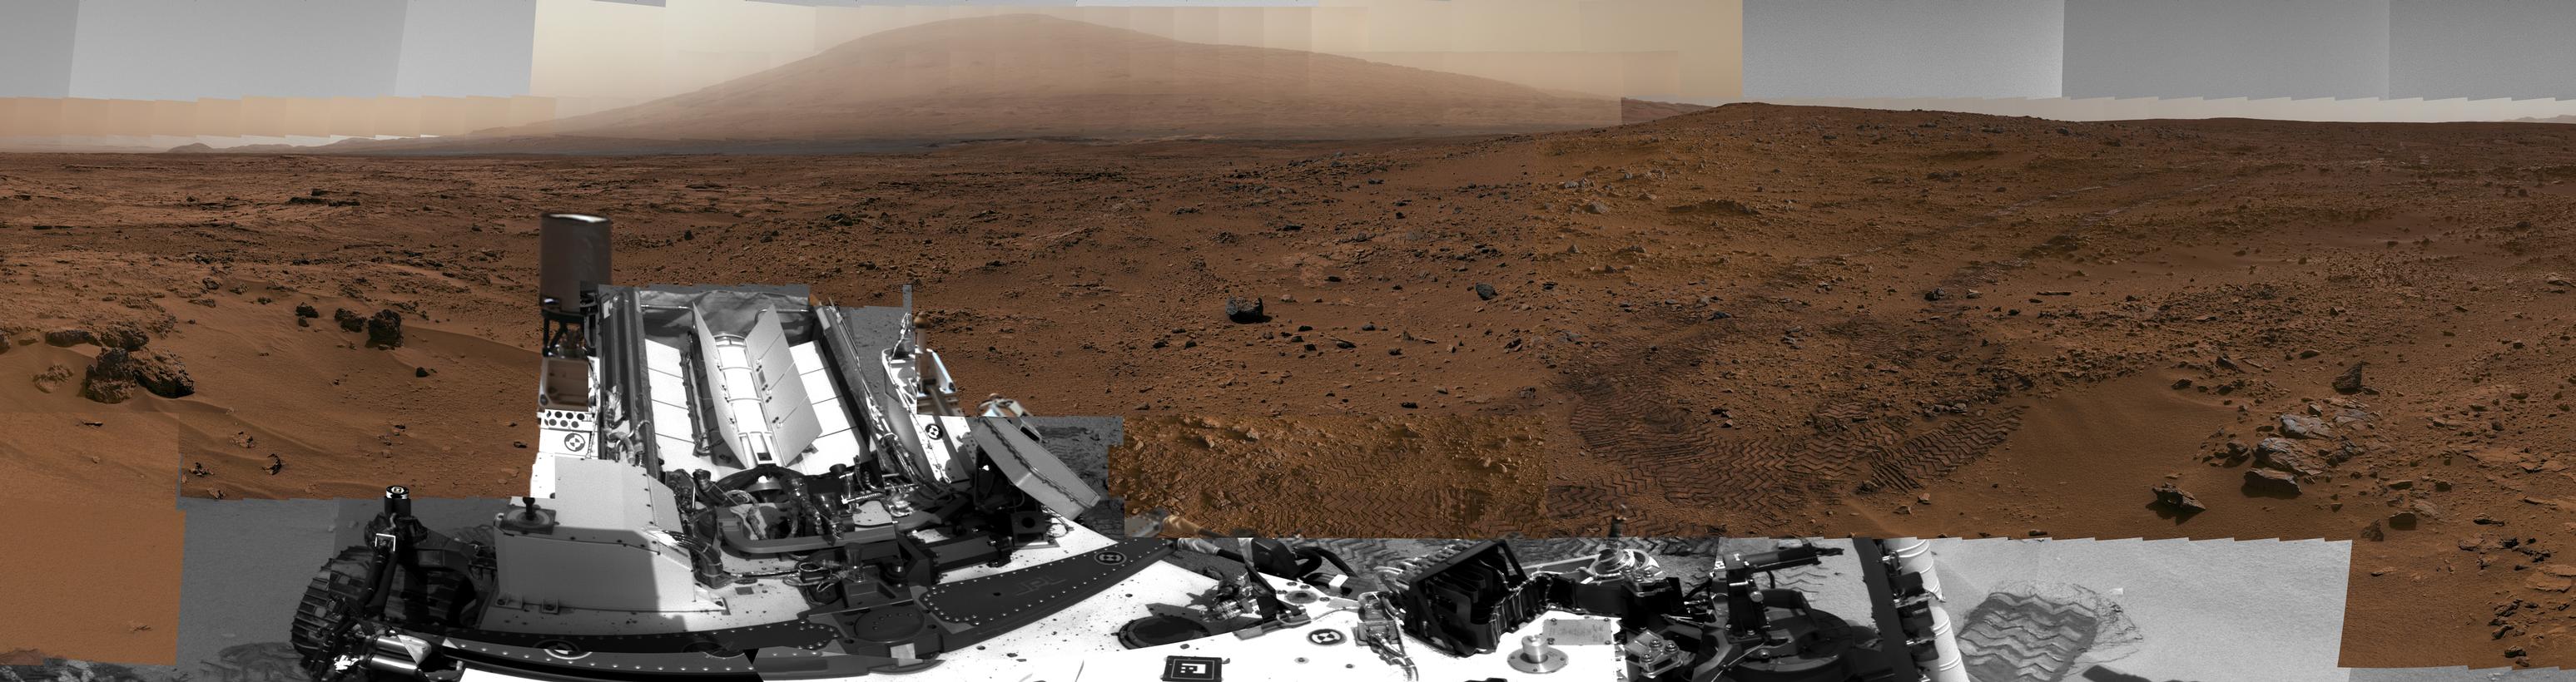 This full-circle view combined nearly 900 images taken by NASA's Curiosity Mars rover, generating a panorama with 1.3 billion pixels in the full-resolution version.